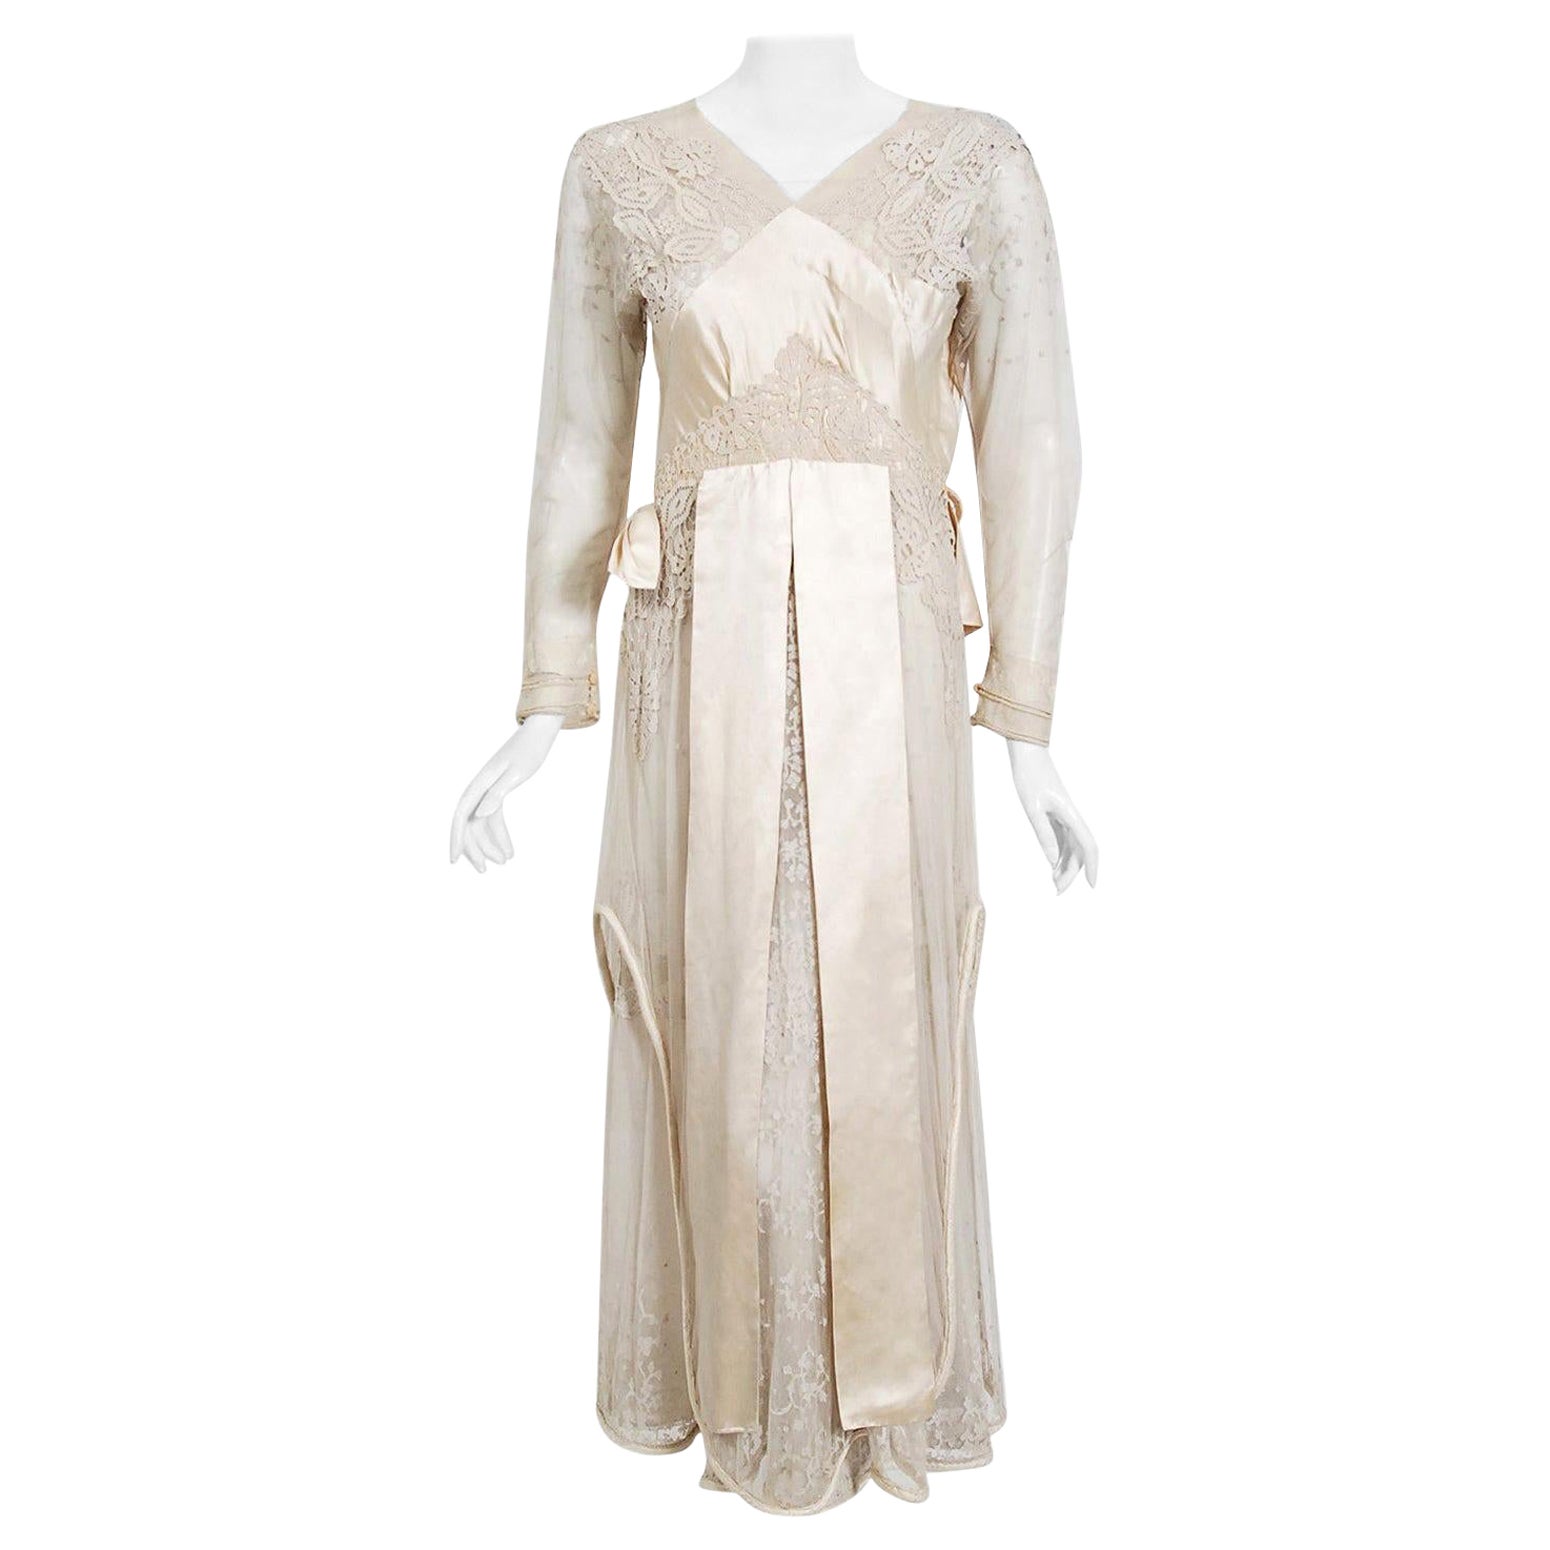 Vintage 1910's Edwardian Couture Ivory Mixed-Lace Draped Layered Bridal Dress For Sale